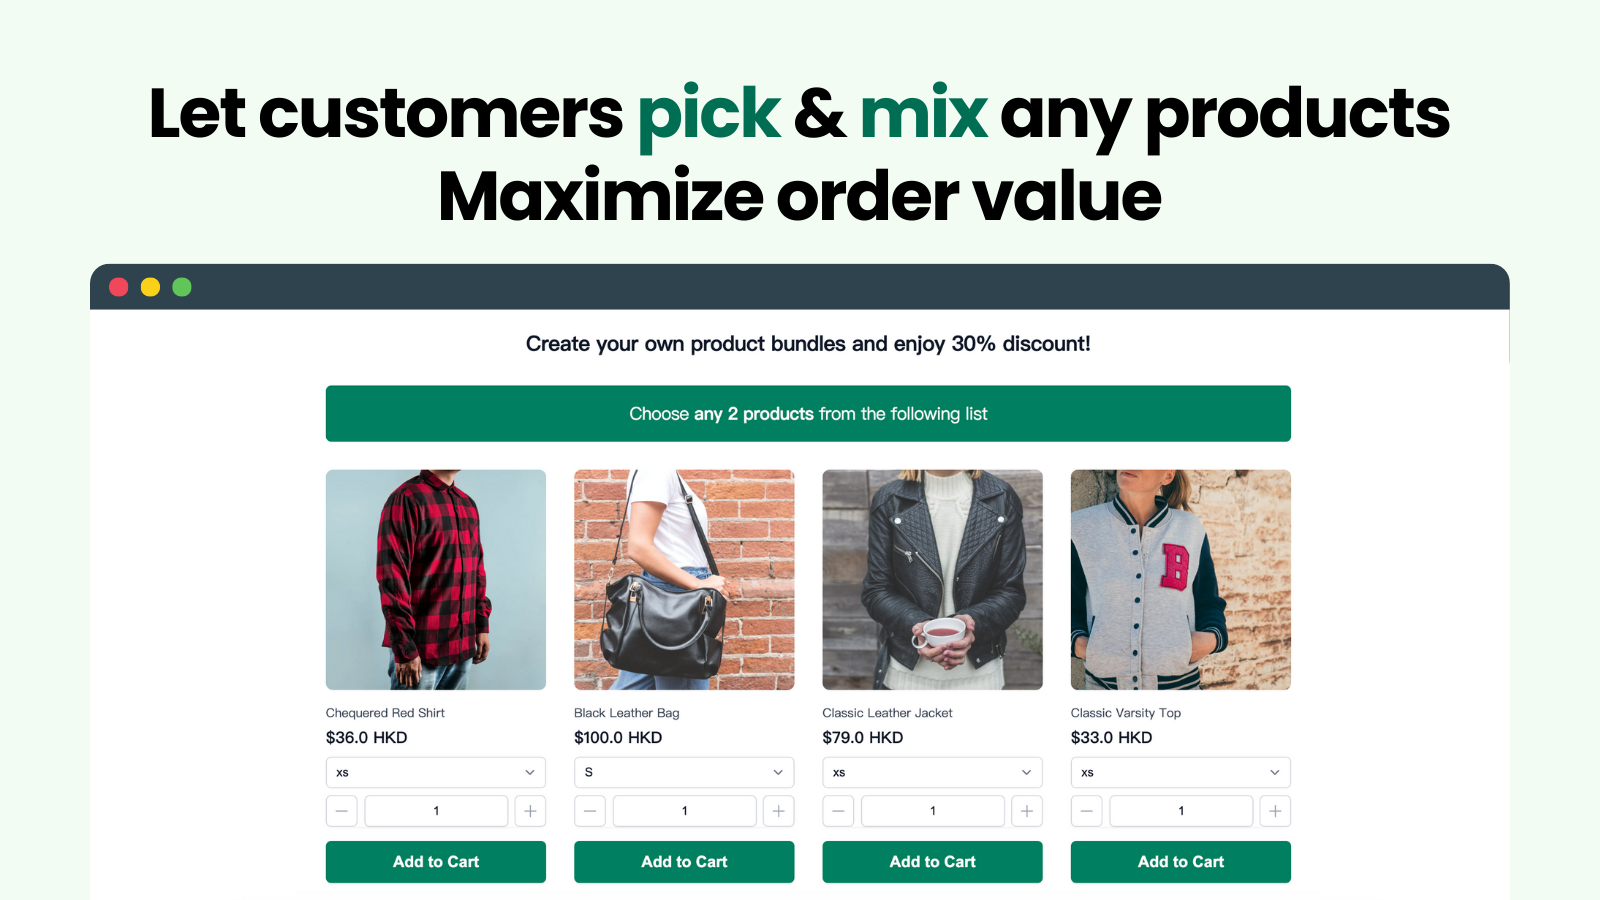 Let customers pick and mix any products. Maximize order value